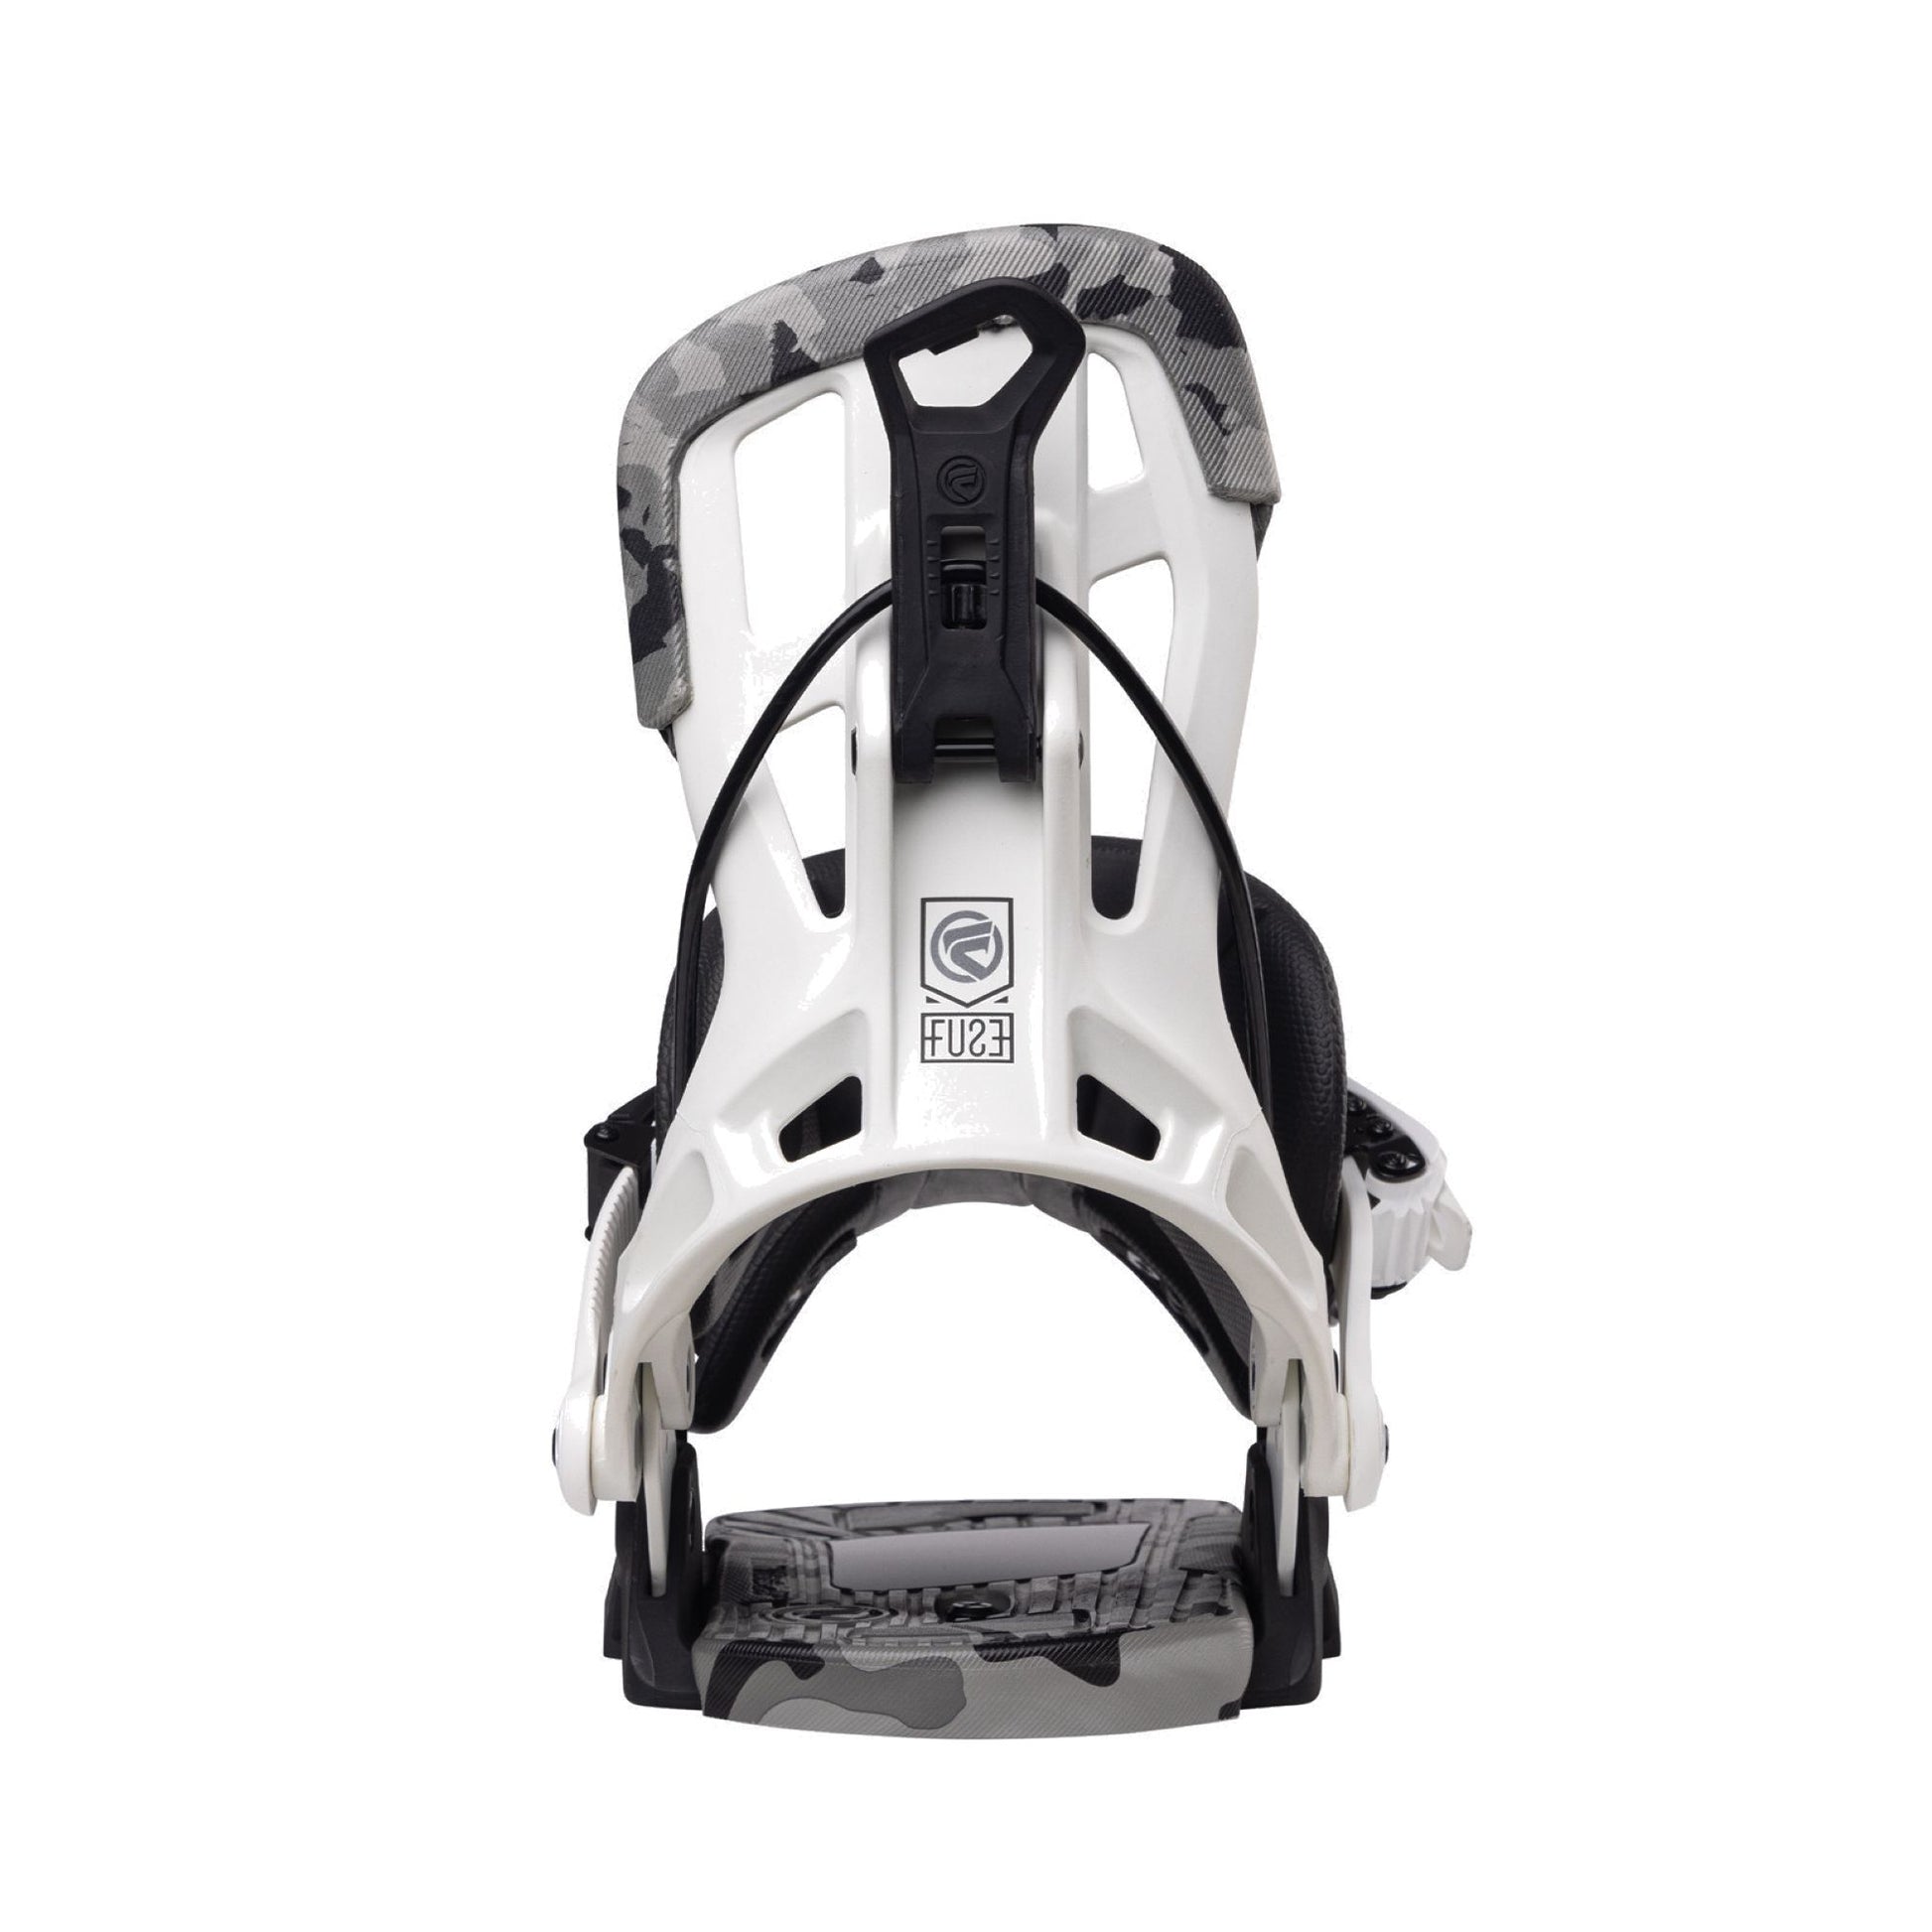 Wired Fuse Bindings - Wired Snowboards